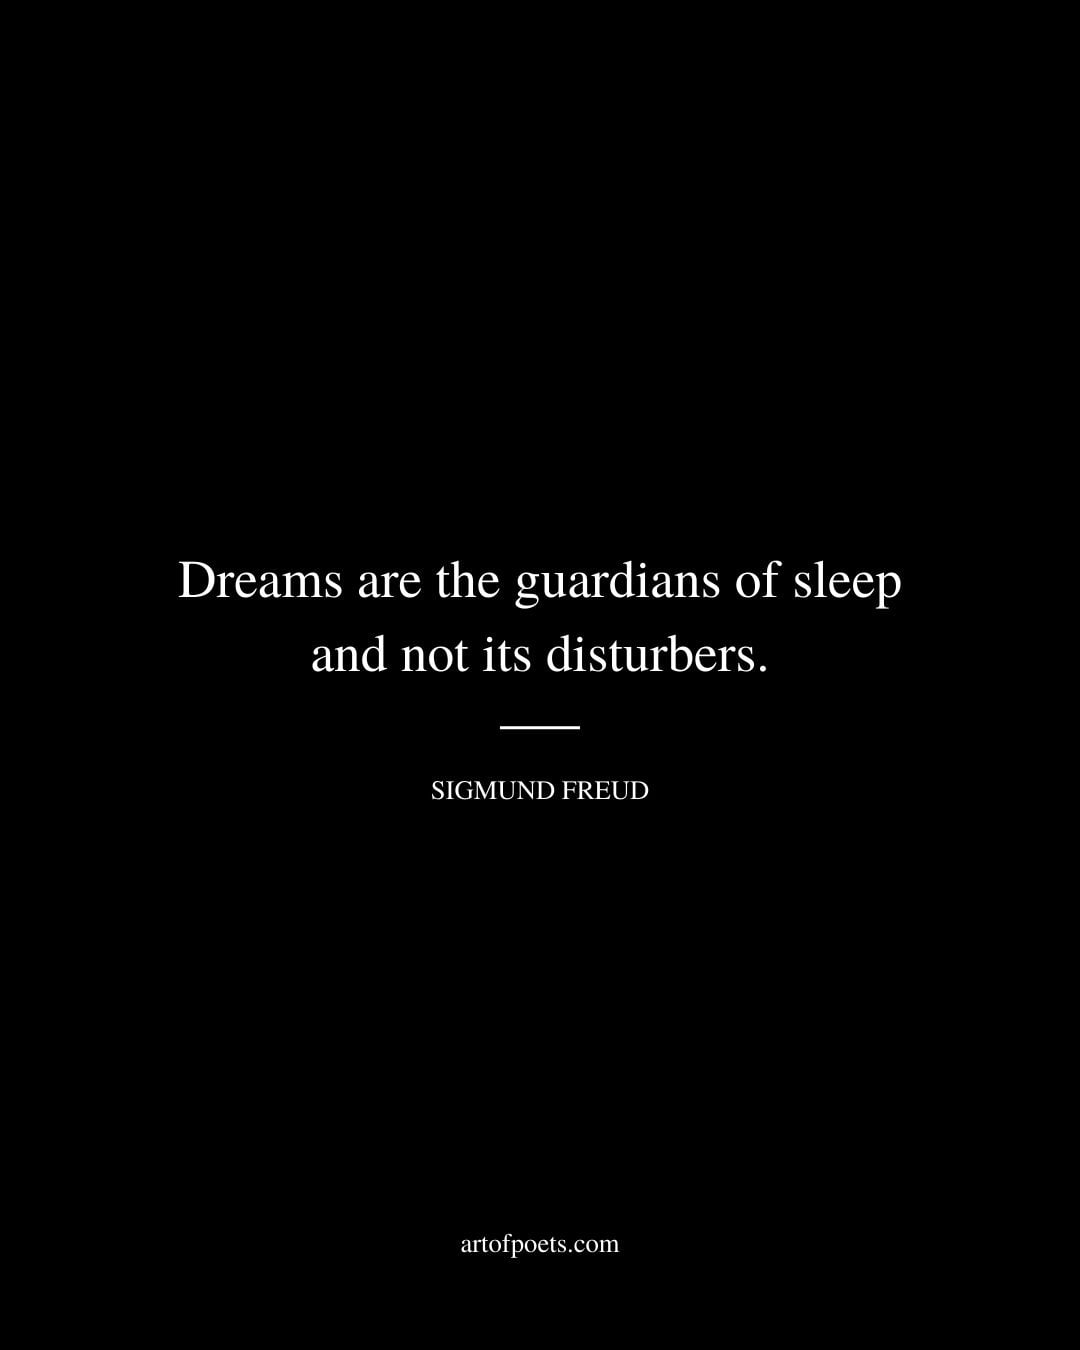 Dreams are the guardians of sleep and not its disturbers